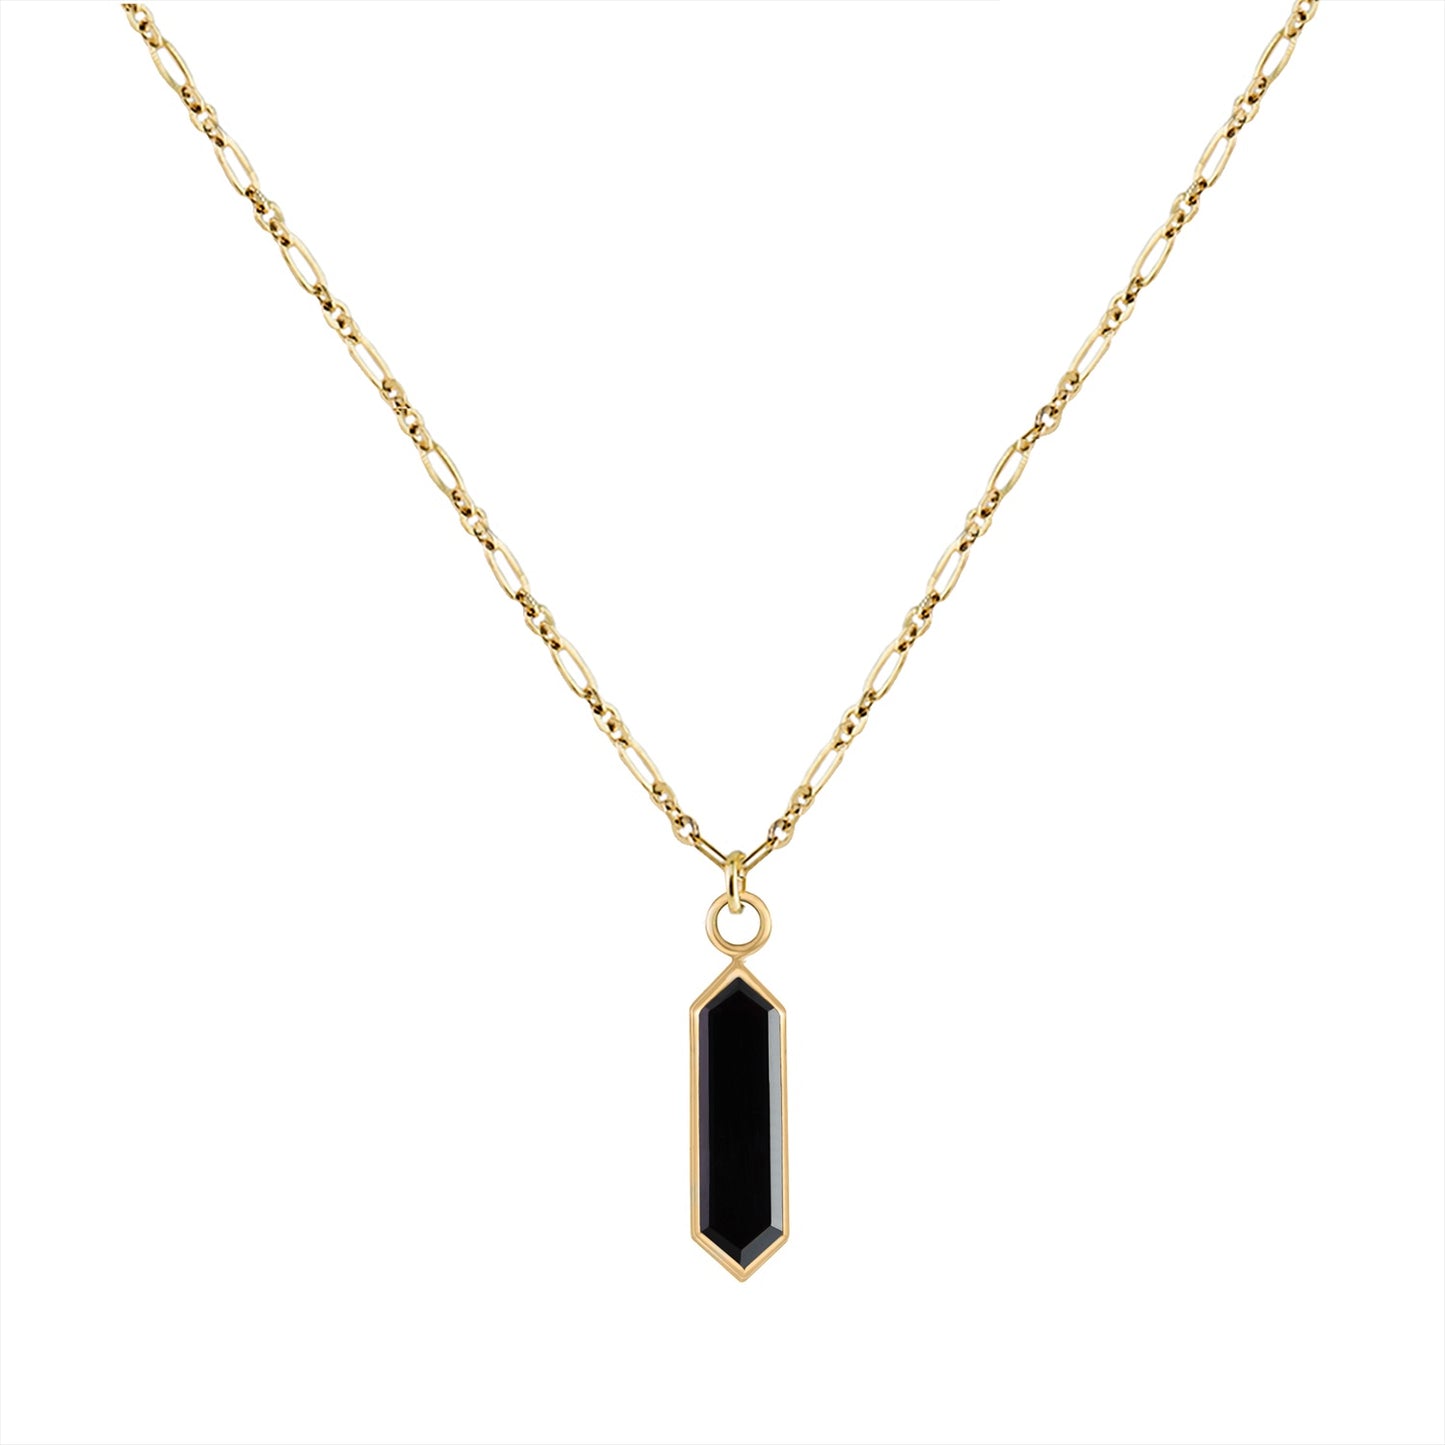 ROMA Adjustable Chain Necklace + Black Spinel Plaque